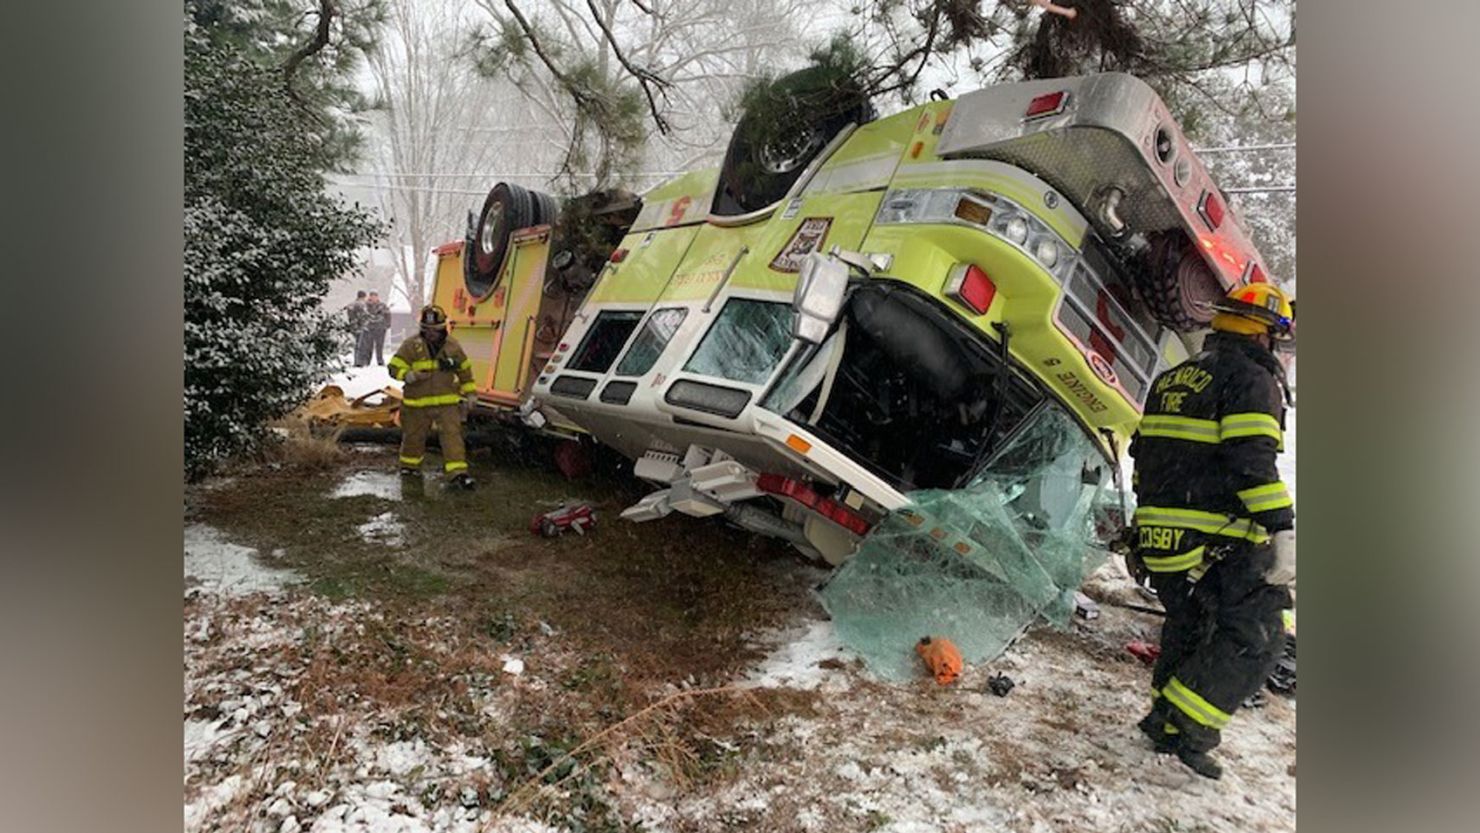 Slippery road conditions factored into this fire truck accident in Virginia on Sunday.